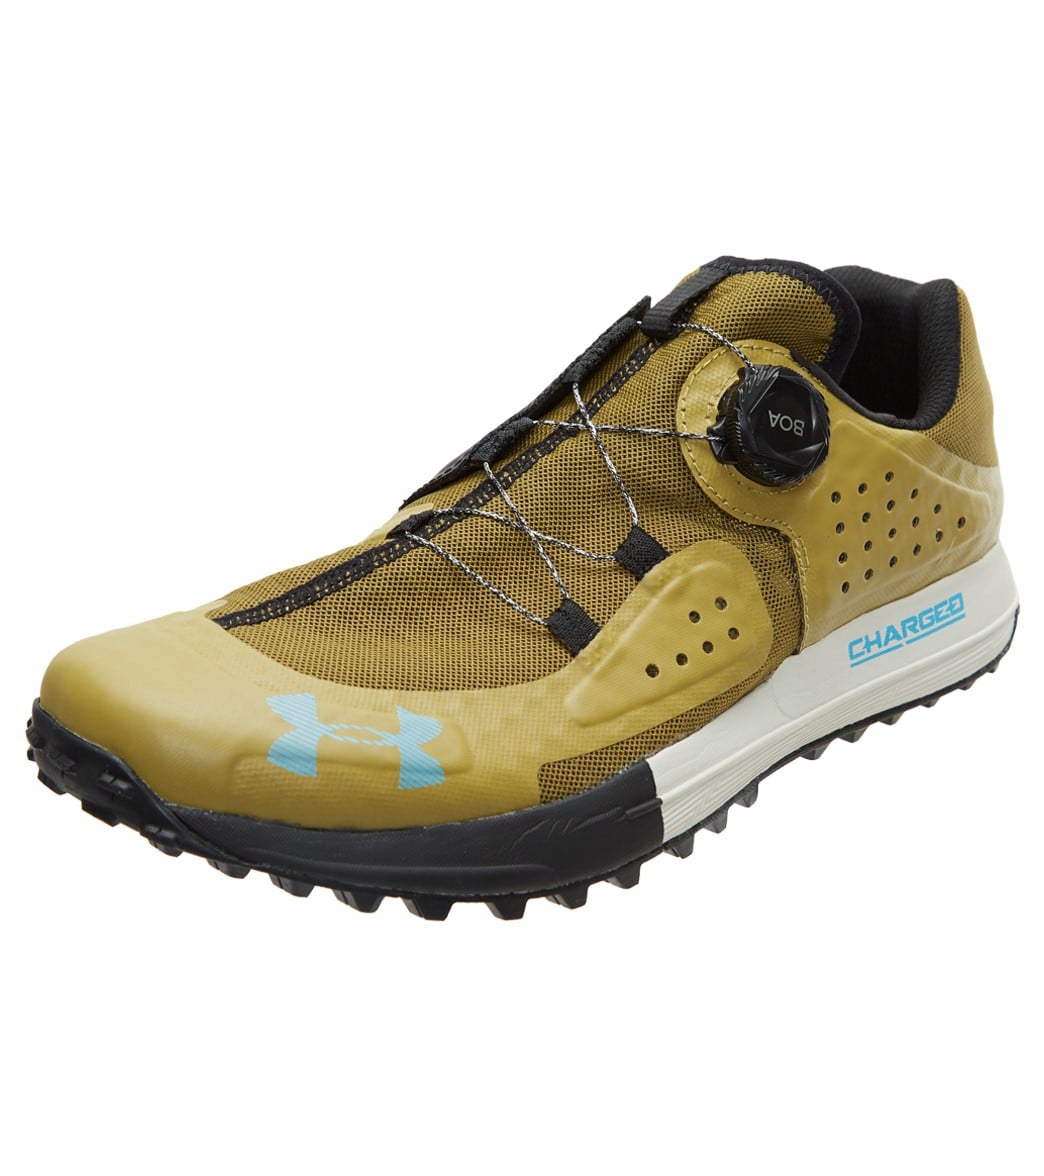 Under Armour Men's Syncline Water Shoe at SwimOutlet.com